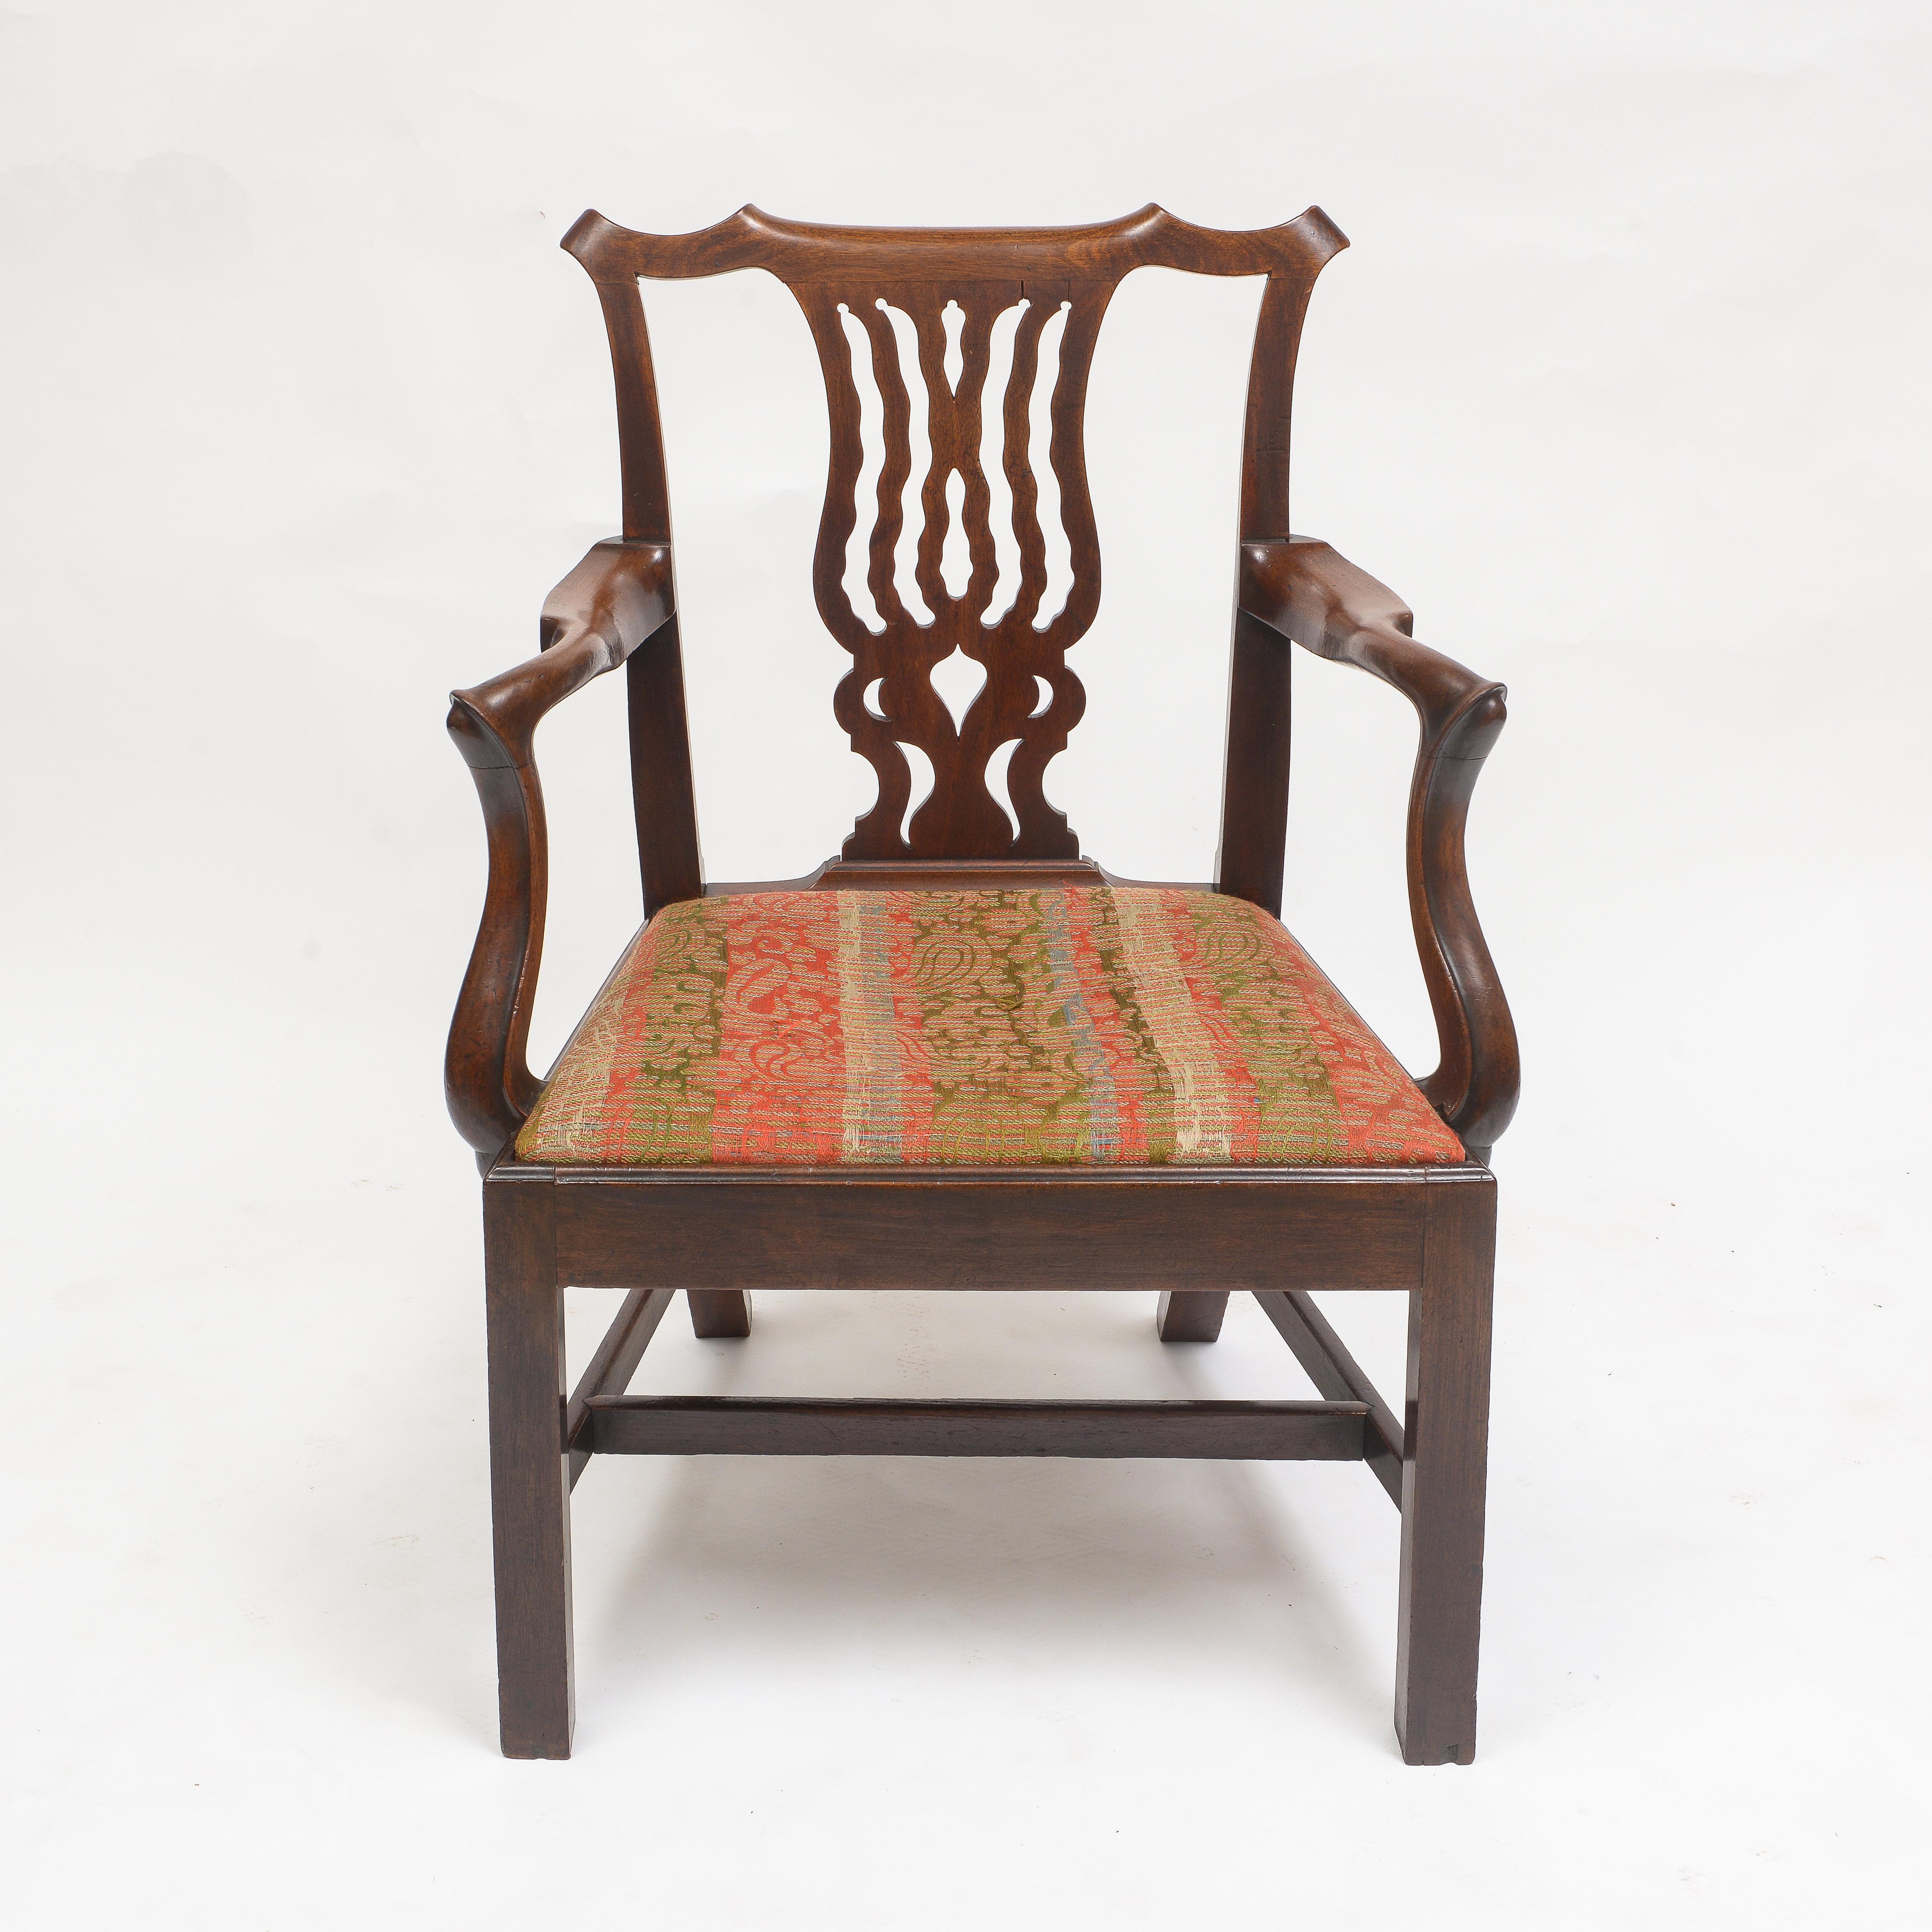 A fine Georgian Arm chair I’m mahogany
Includes an unusual wavy back-splat and beautifully carved arms
Supported by Marlboro legs